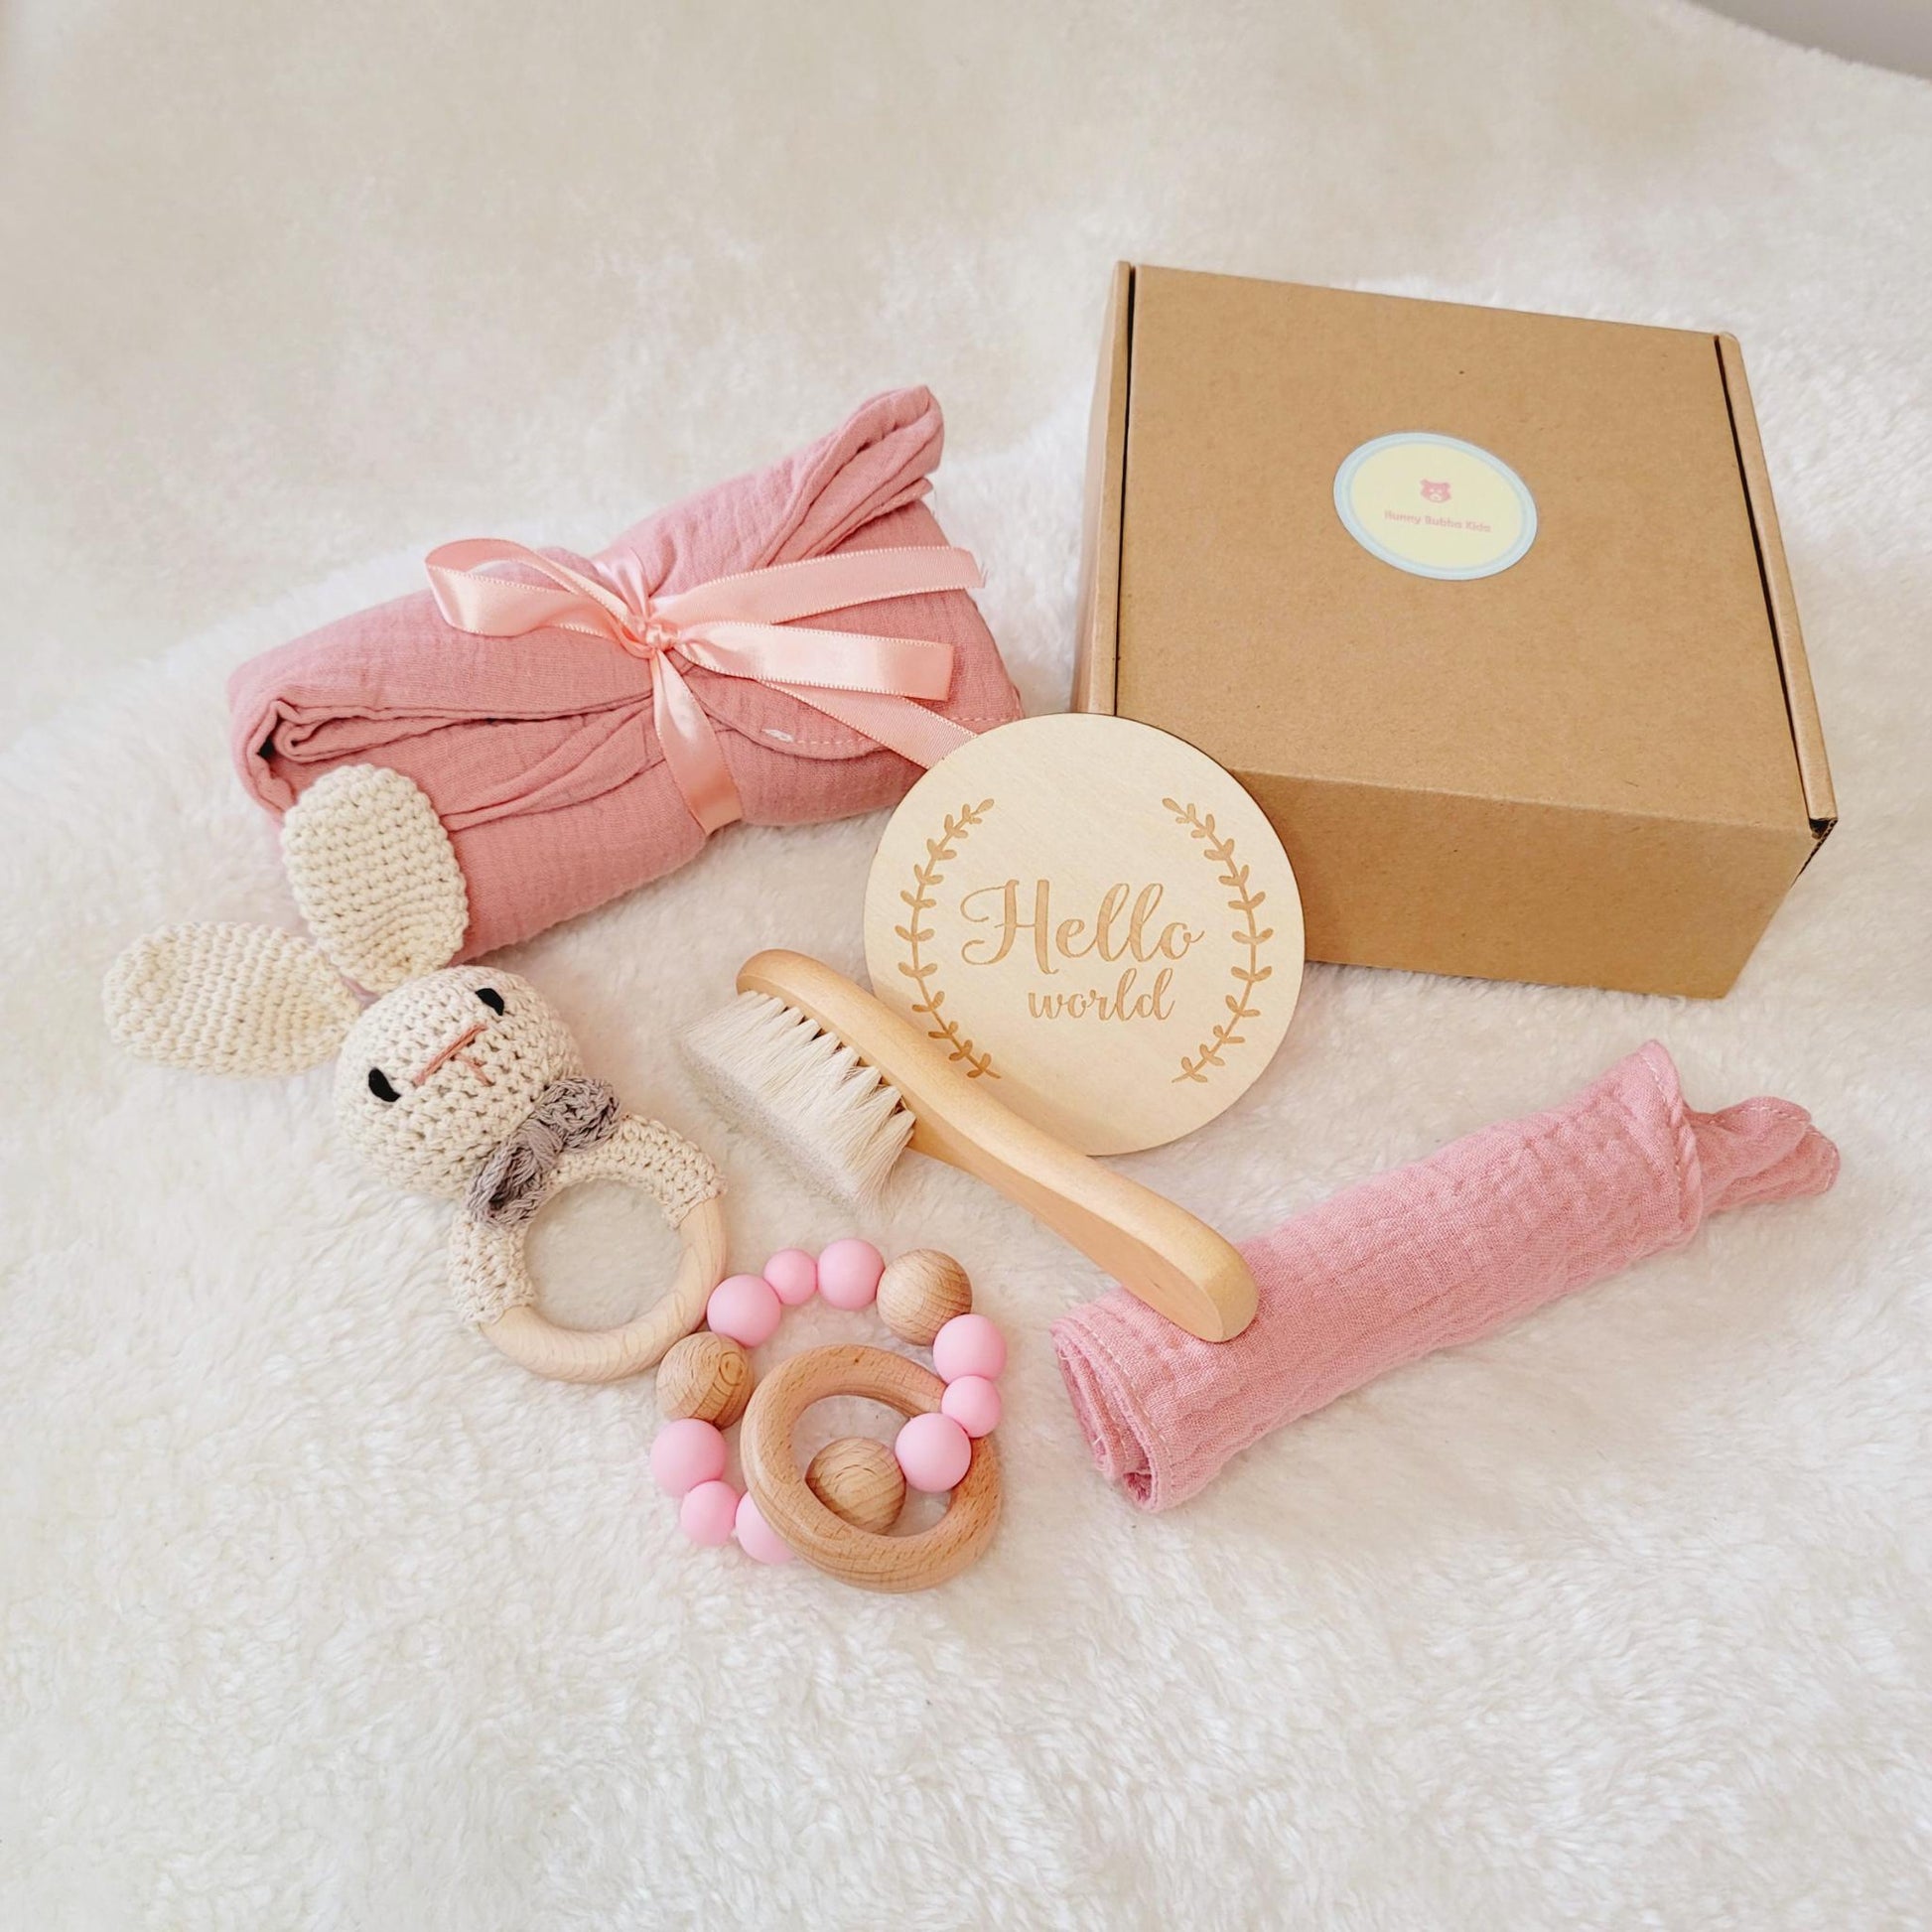 cute bunny newborn gift set for bath time and welcoming for babies, toddlers , kids